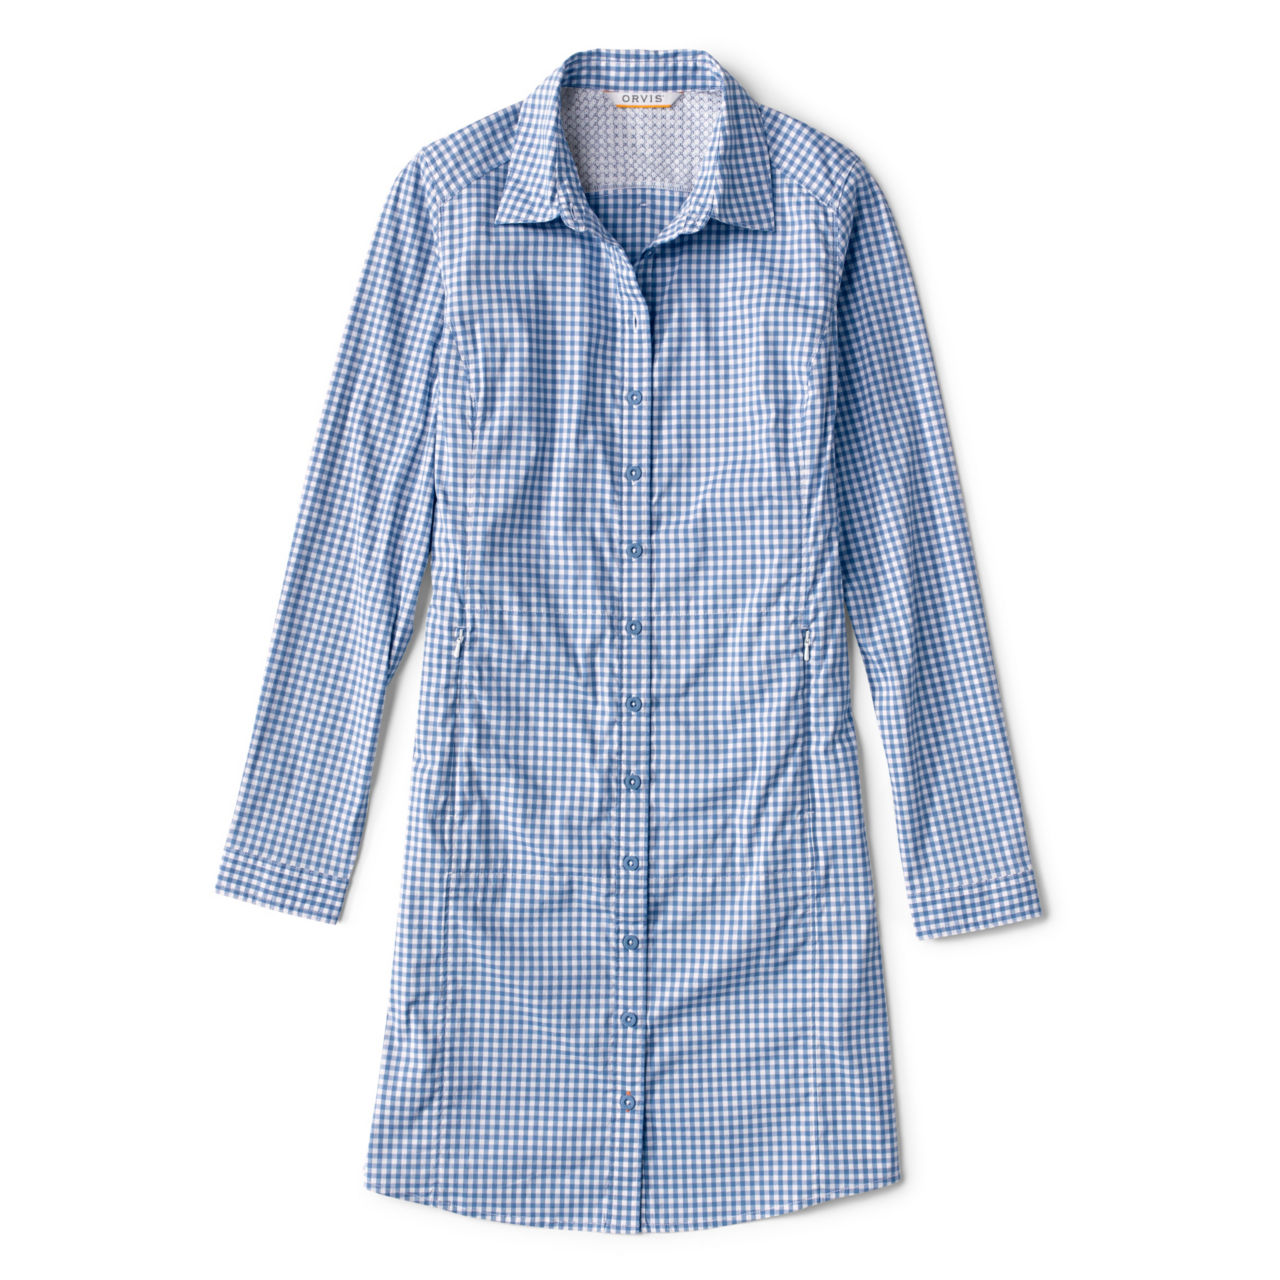 River Guide Long-Sleeved Dress - DUSTY BLUE CHECK image number 1